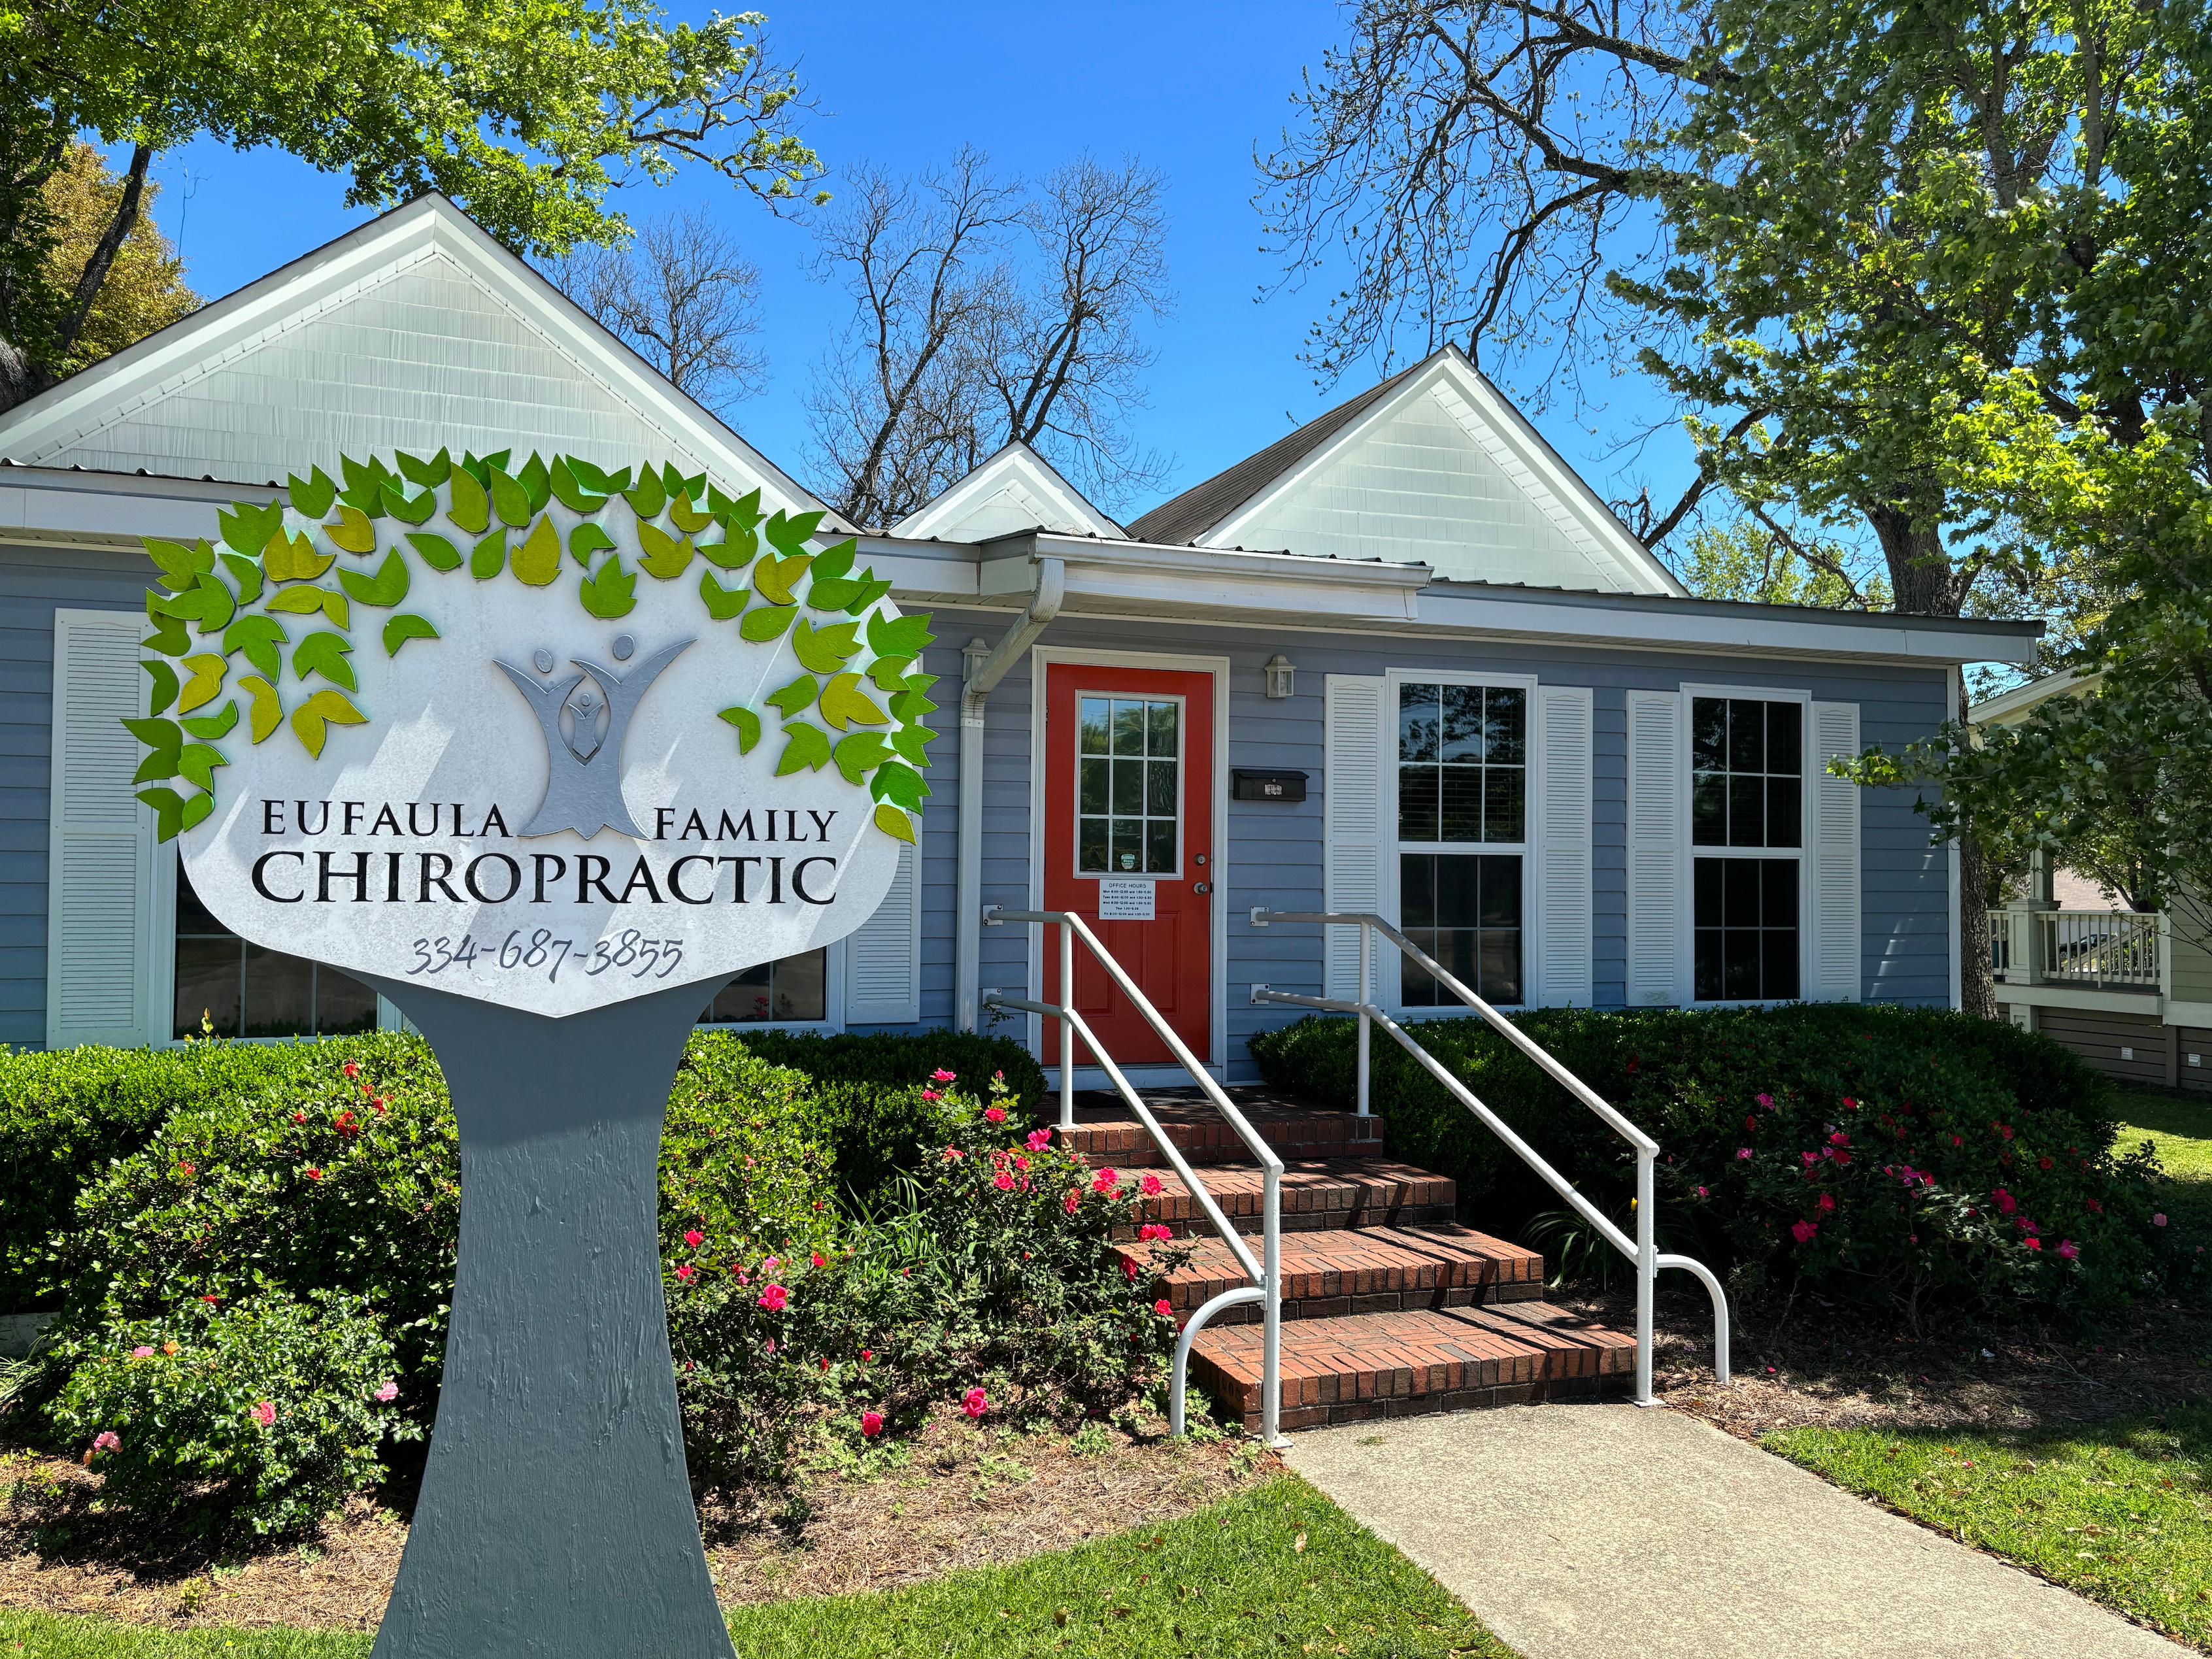 Eufaula Family Chiropractic - Office Exterior